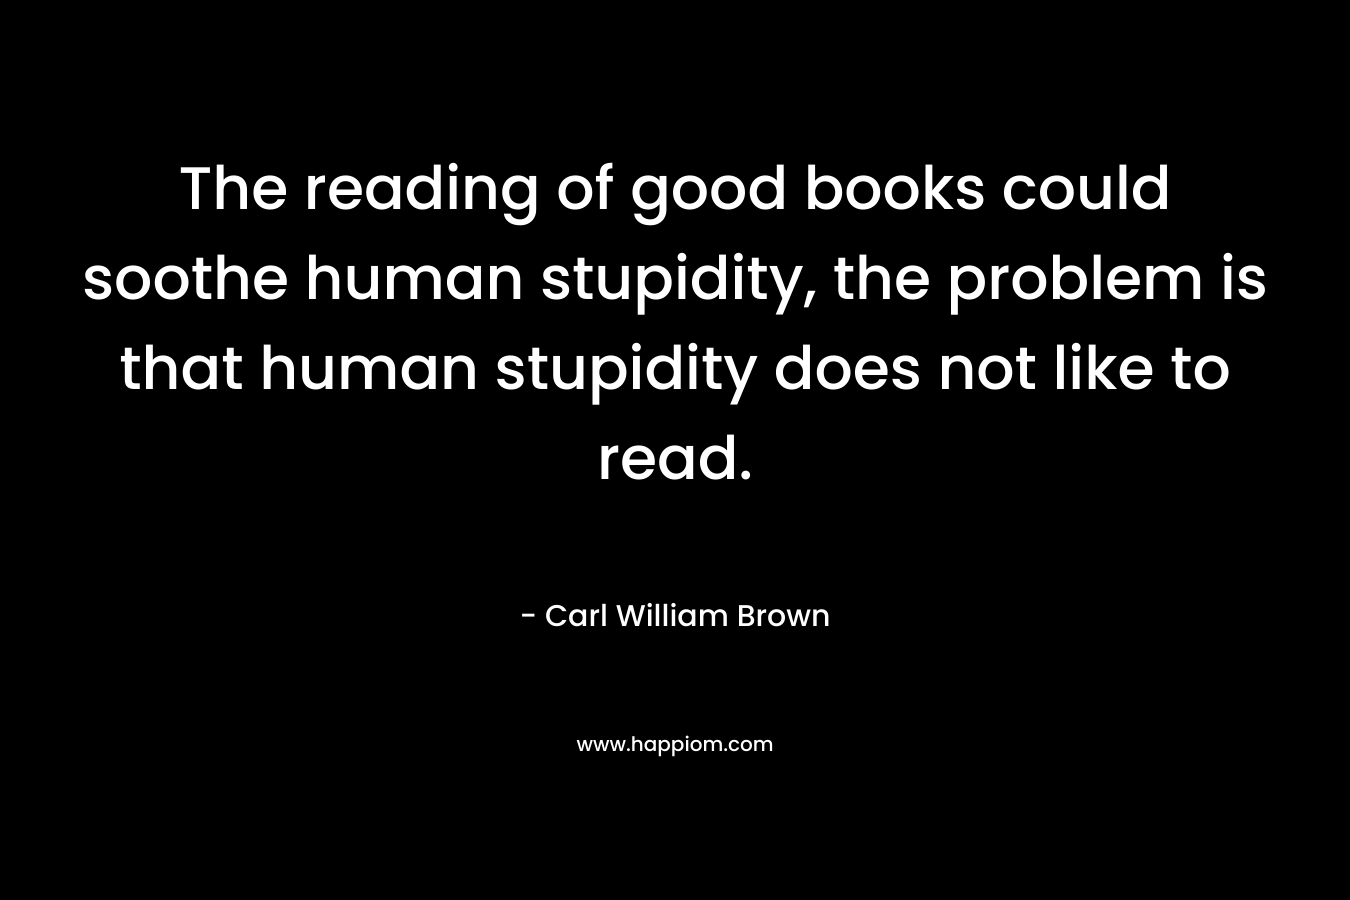 The reading of good books could soothe human stupidity, the problem is that human stupidity does not like to read. – Carl William Brown